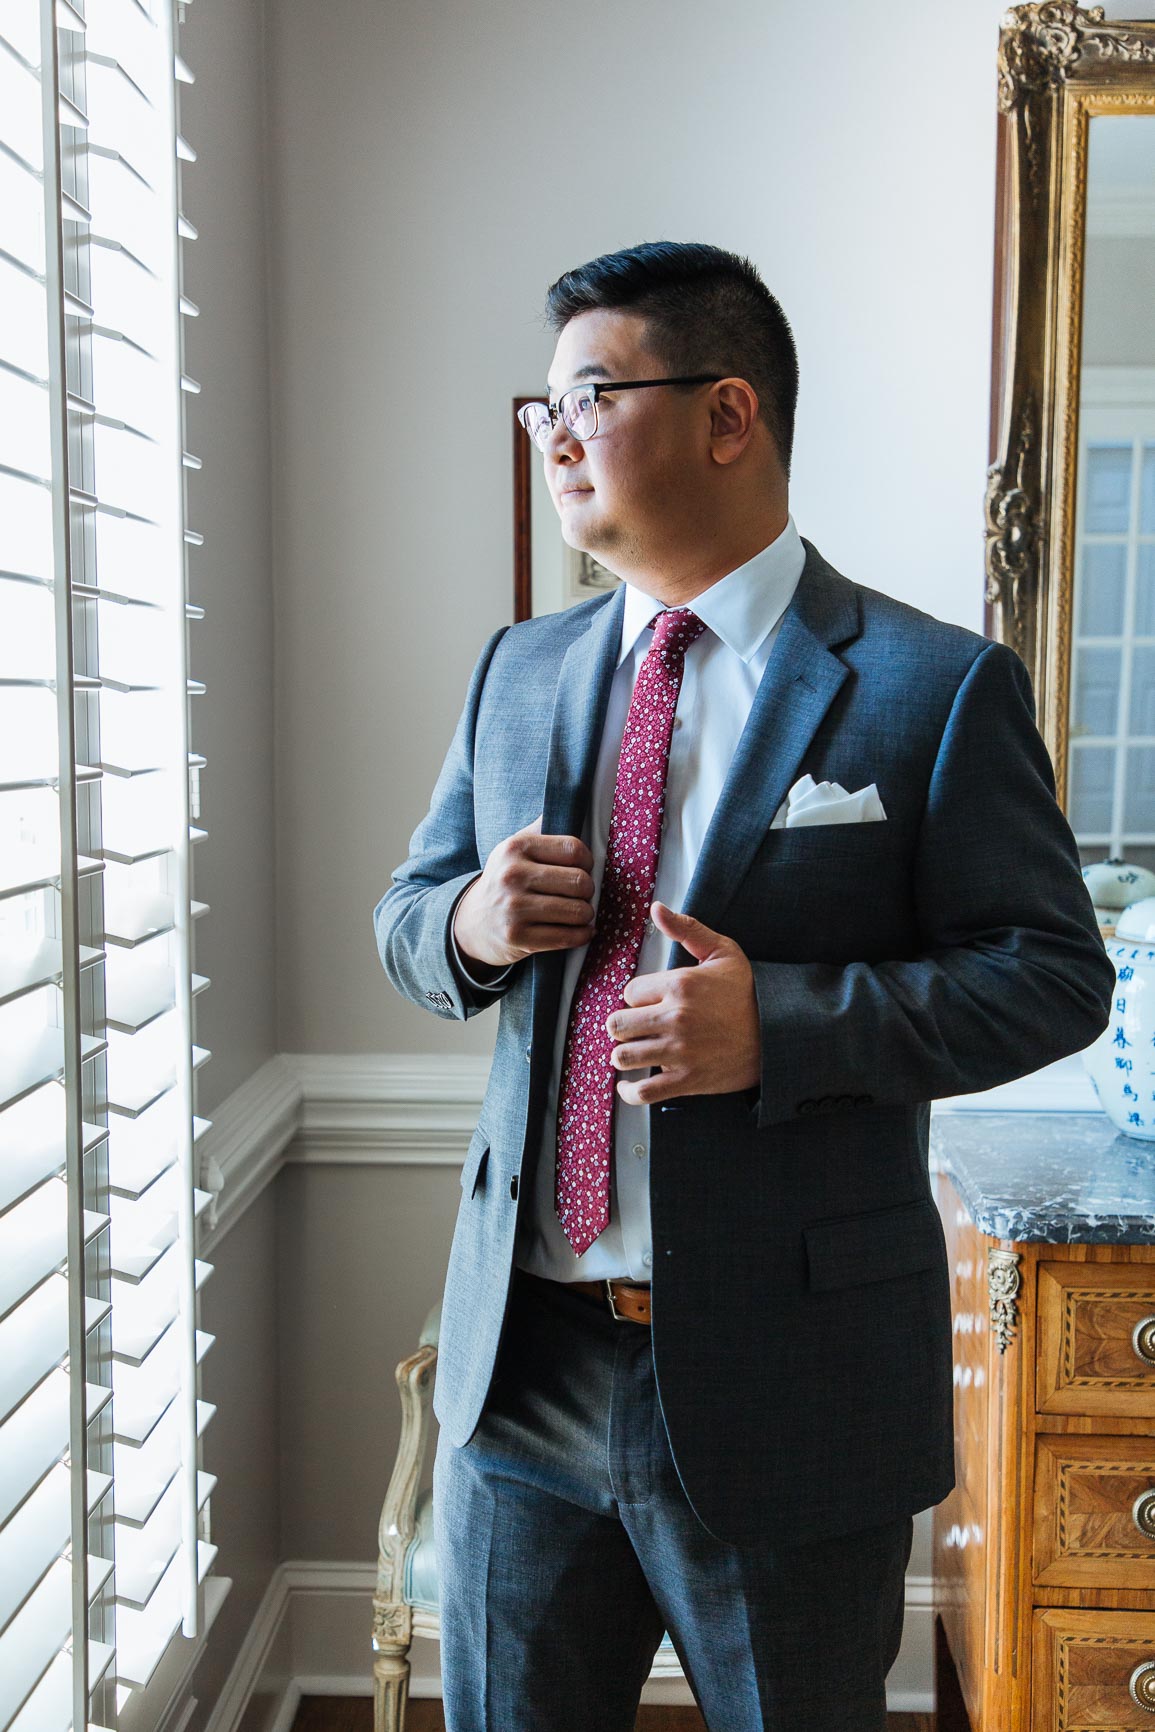 Wedding getting ready in Charlotte, NC ready by Nhieu Tang photography | nhieutang.com